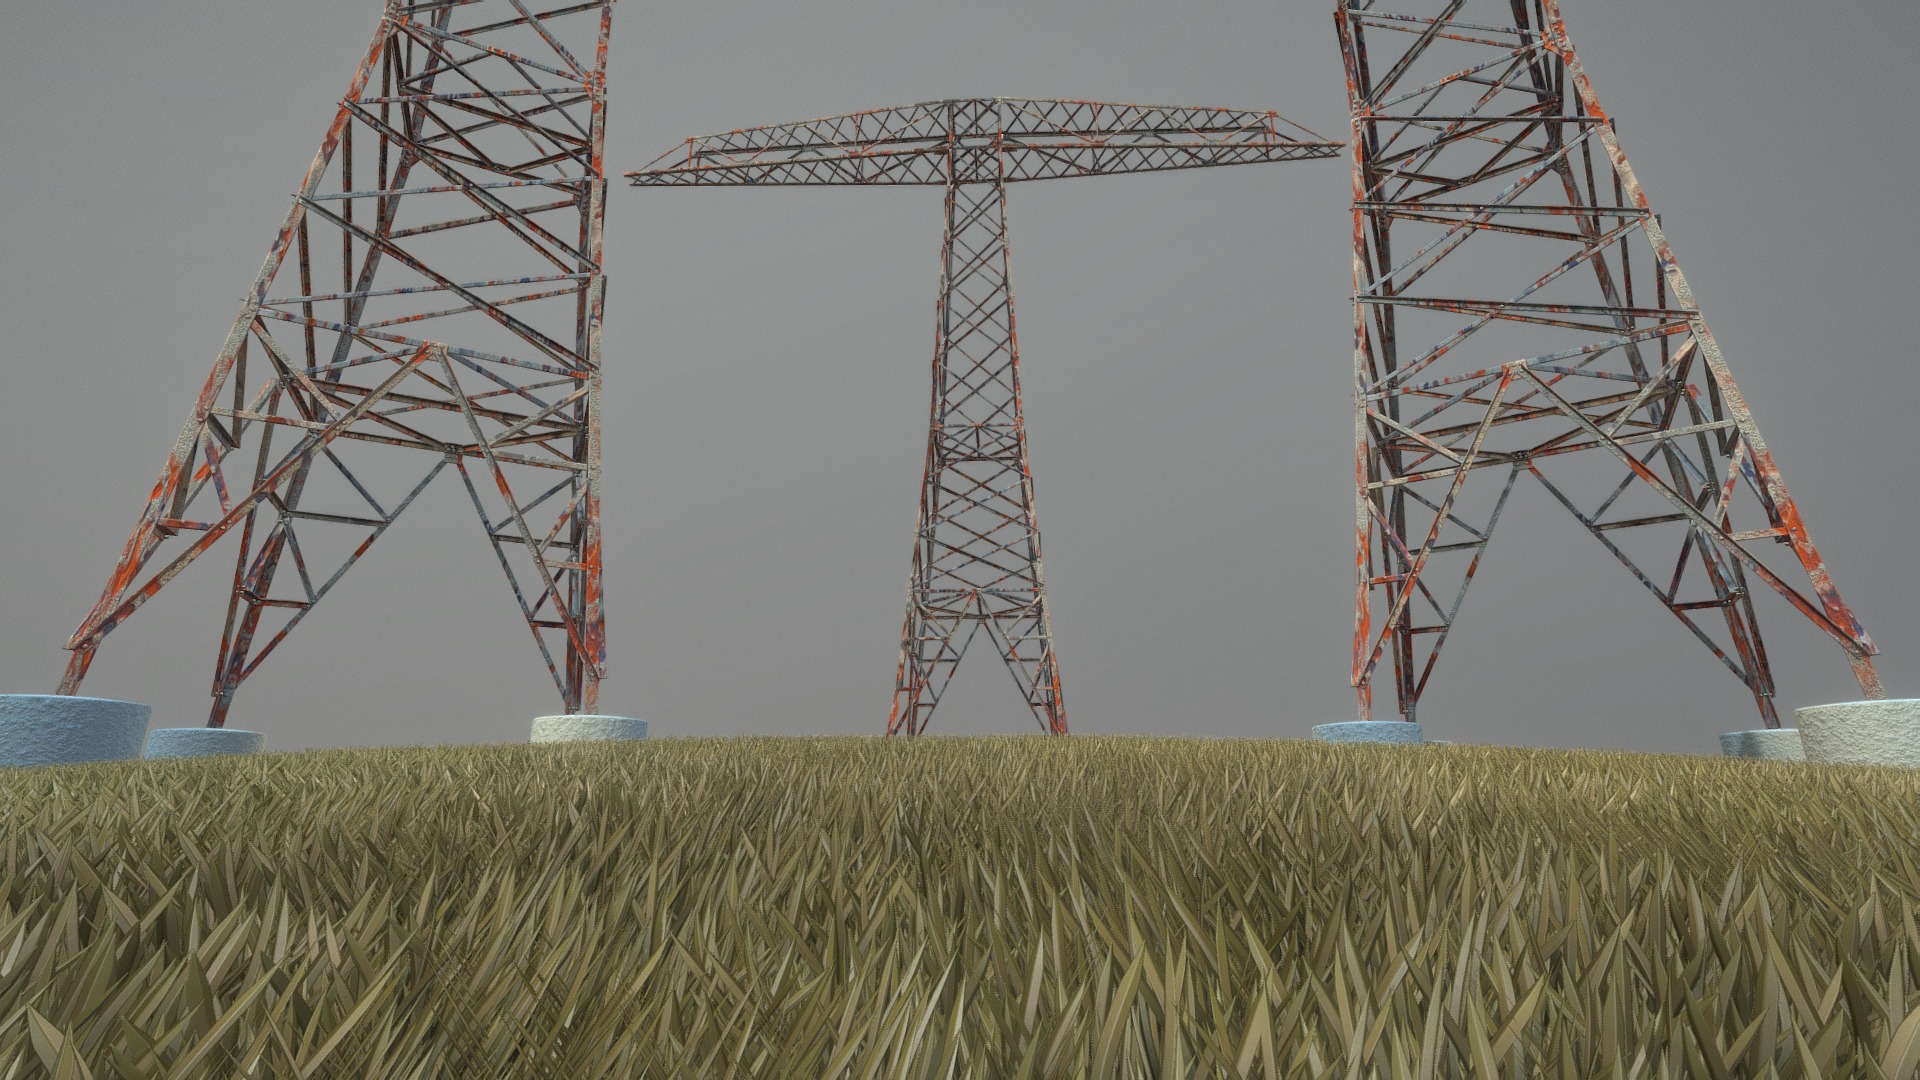 3D model Rusty Transmission Tower Package - This is a 3D model of the Rusty Transmission Tower Package. The 3D model is about a large metal structure in a field.